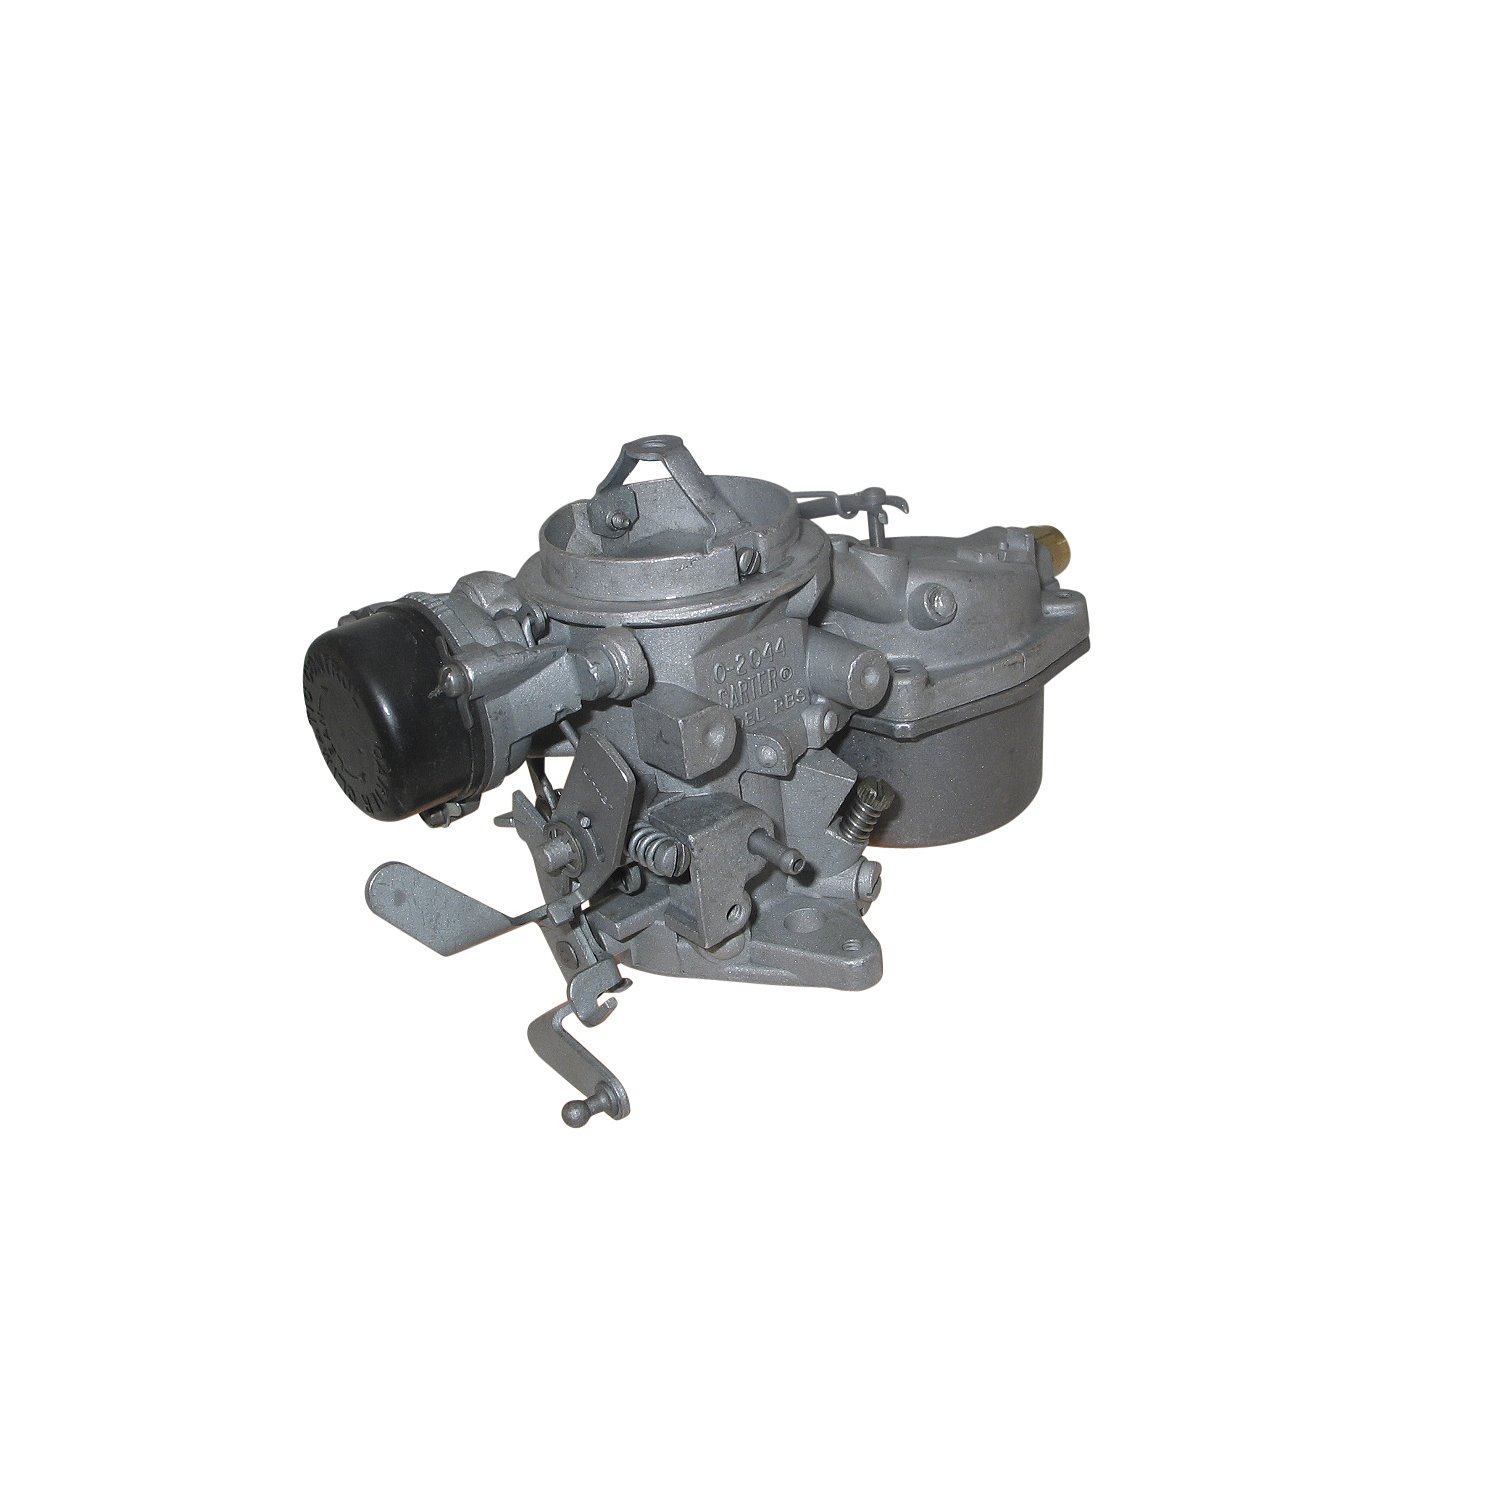 7-7271 Carter Remanufactured Carburetor, RBS, w/o A/C-Style